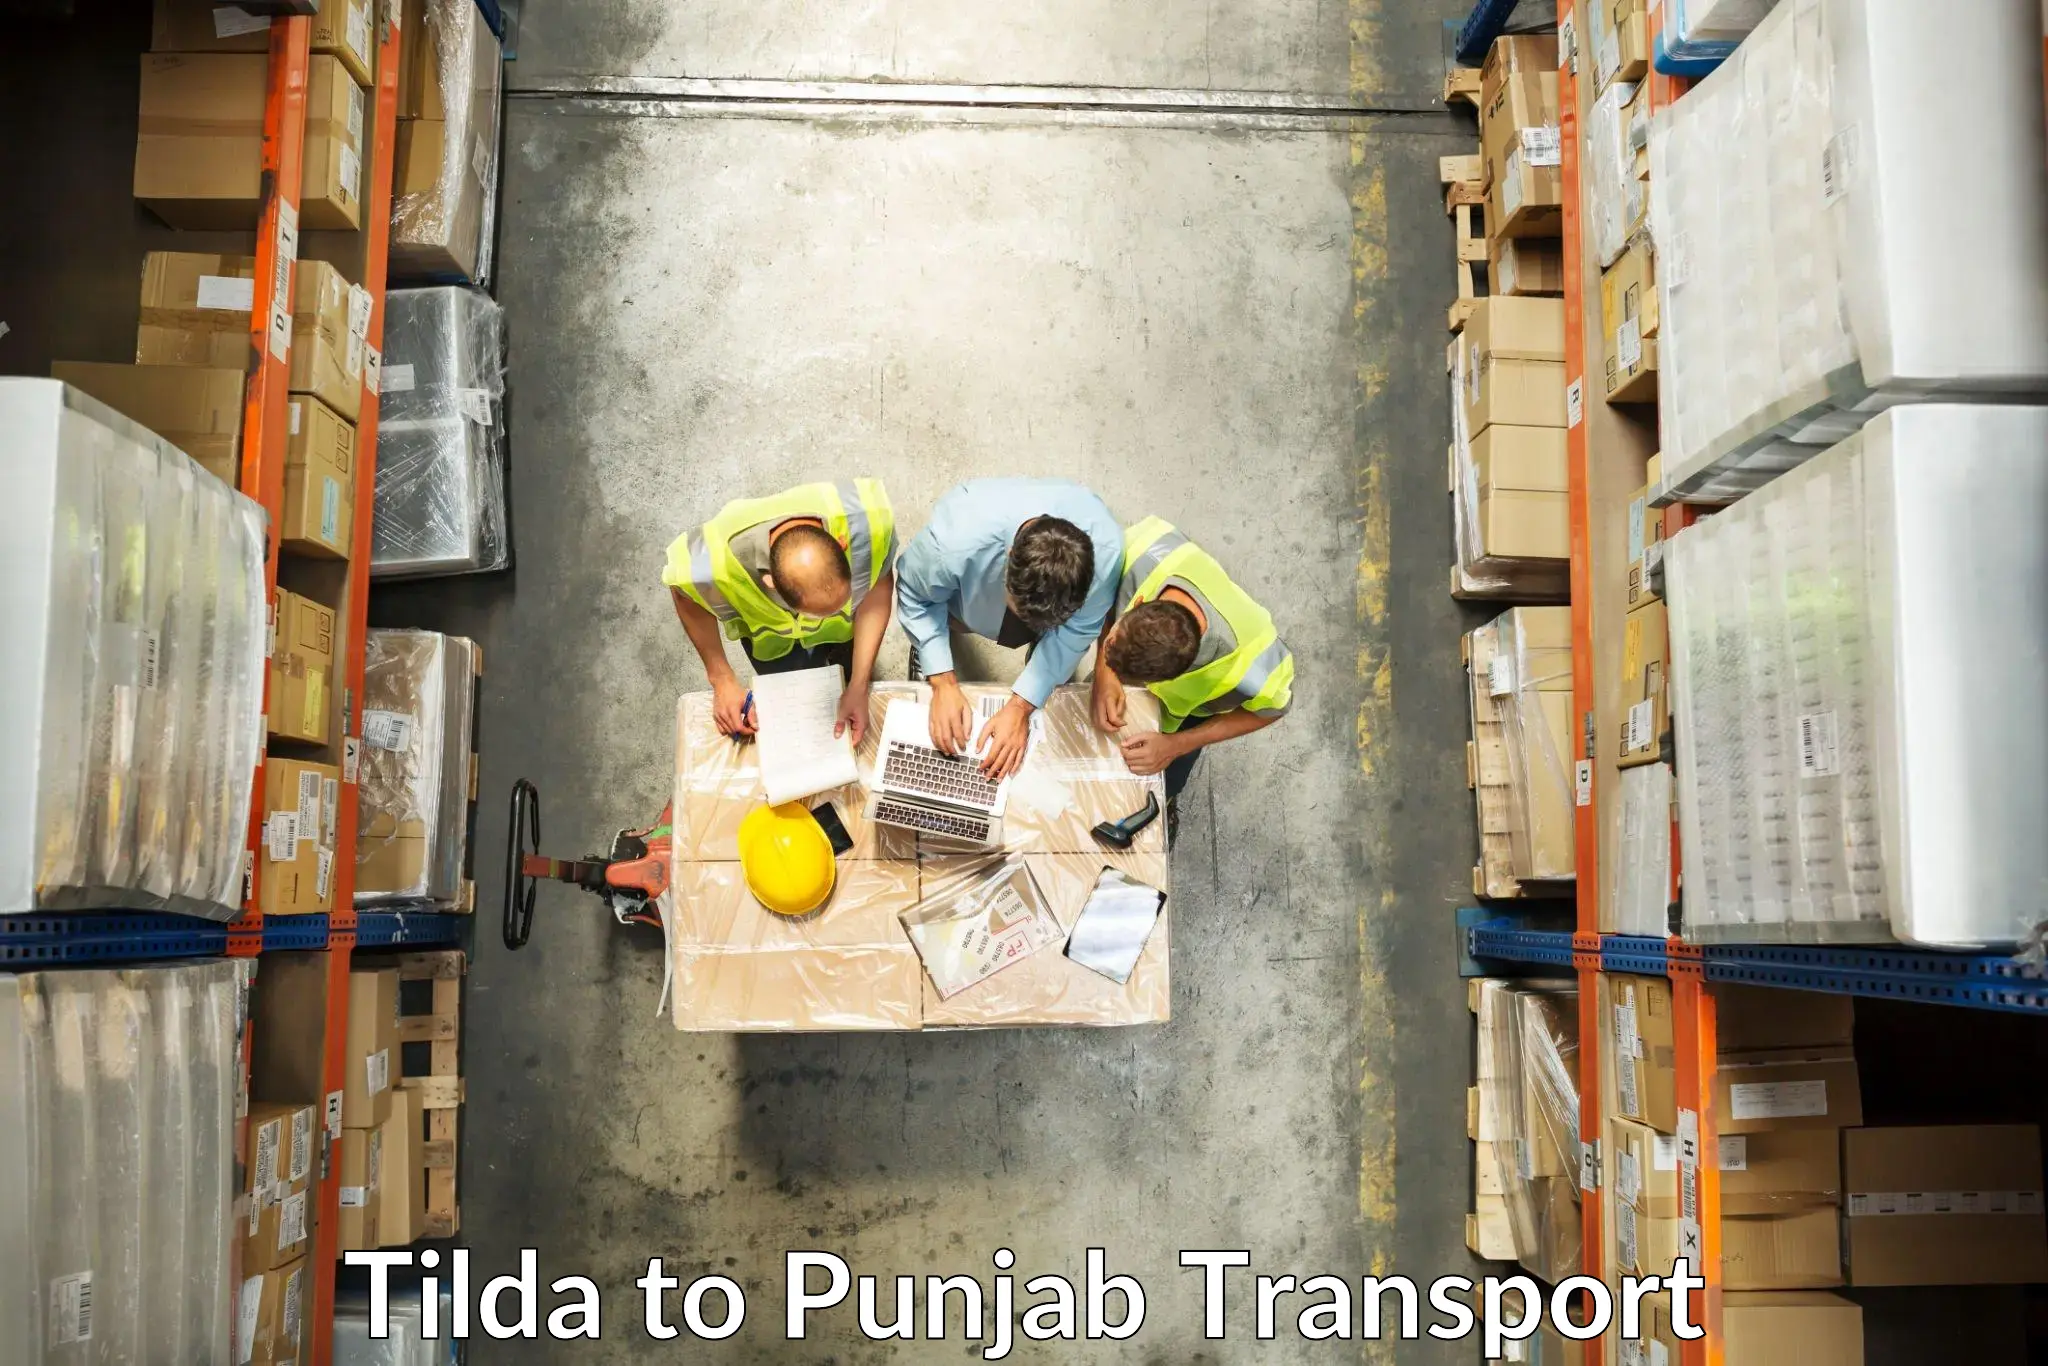 Transport bike from one state to another in Tilda to Punjab